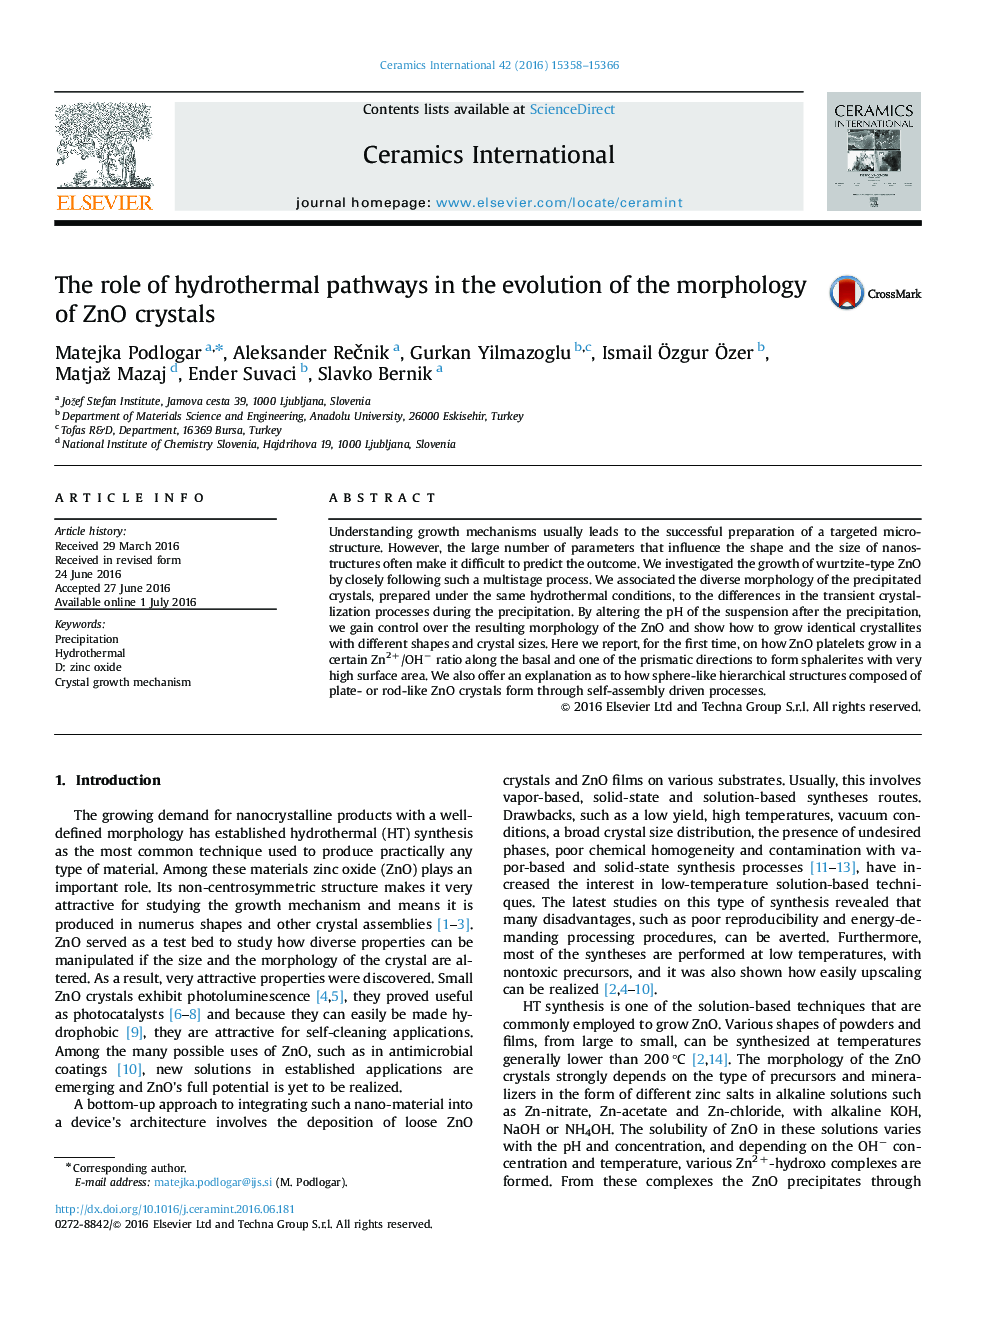 The role of hydrothermal pathways in the evolution of the morphology of ZnO crystals